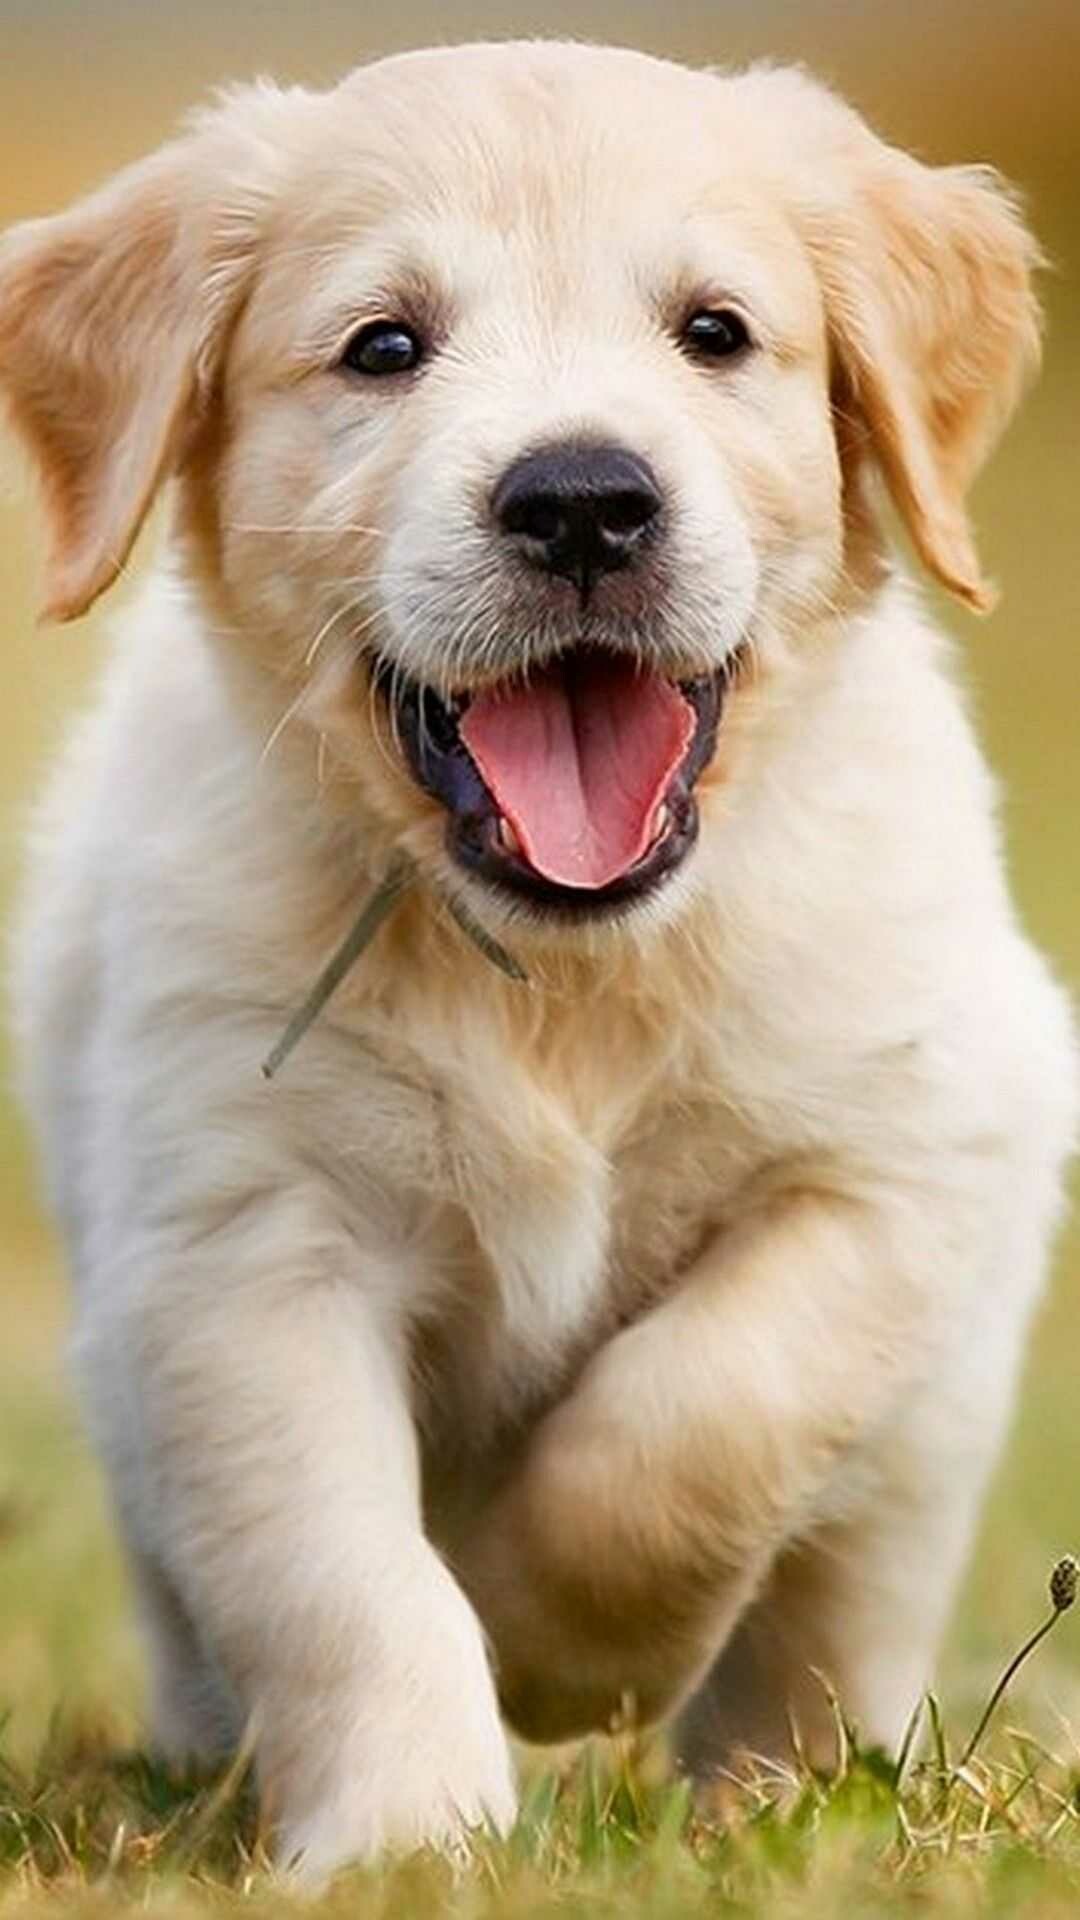 Puppy: One of the first domesticated animals, A baby dog. 1080x1920 Full HD Wallpaper.